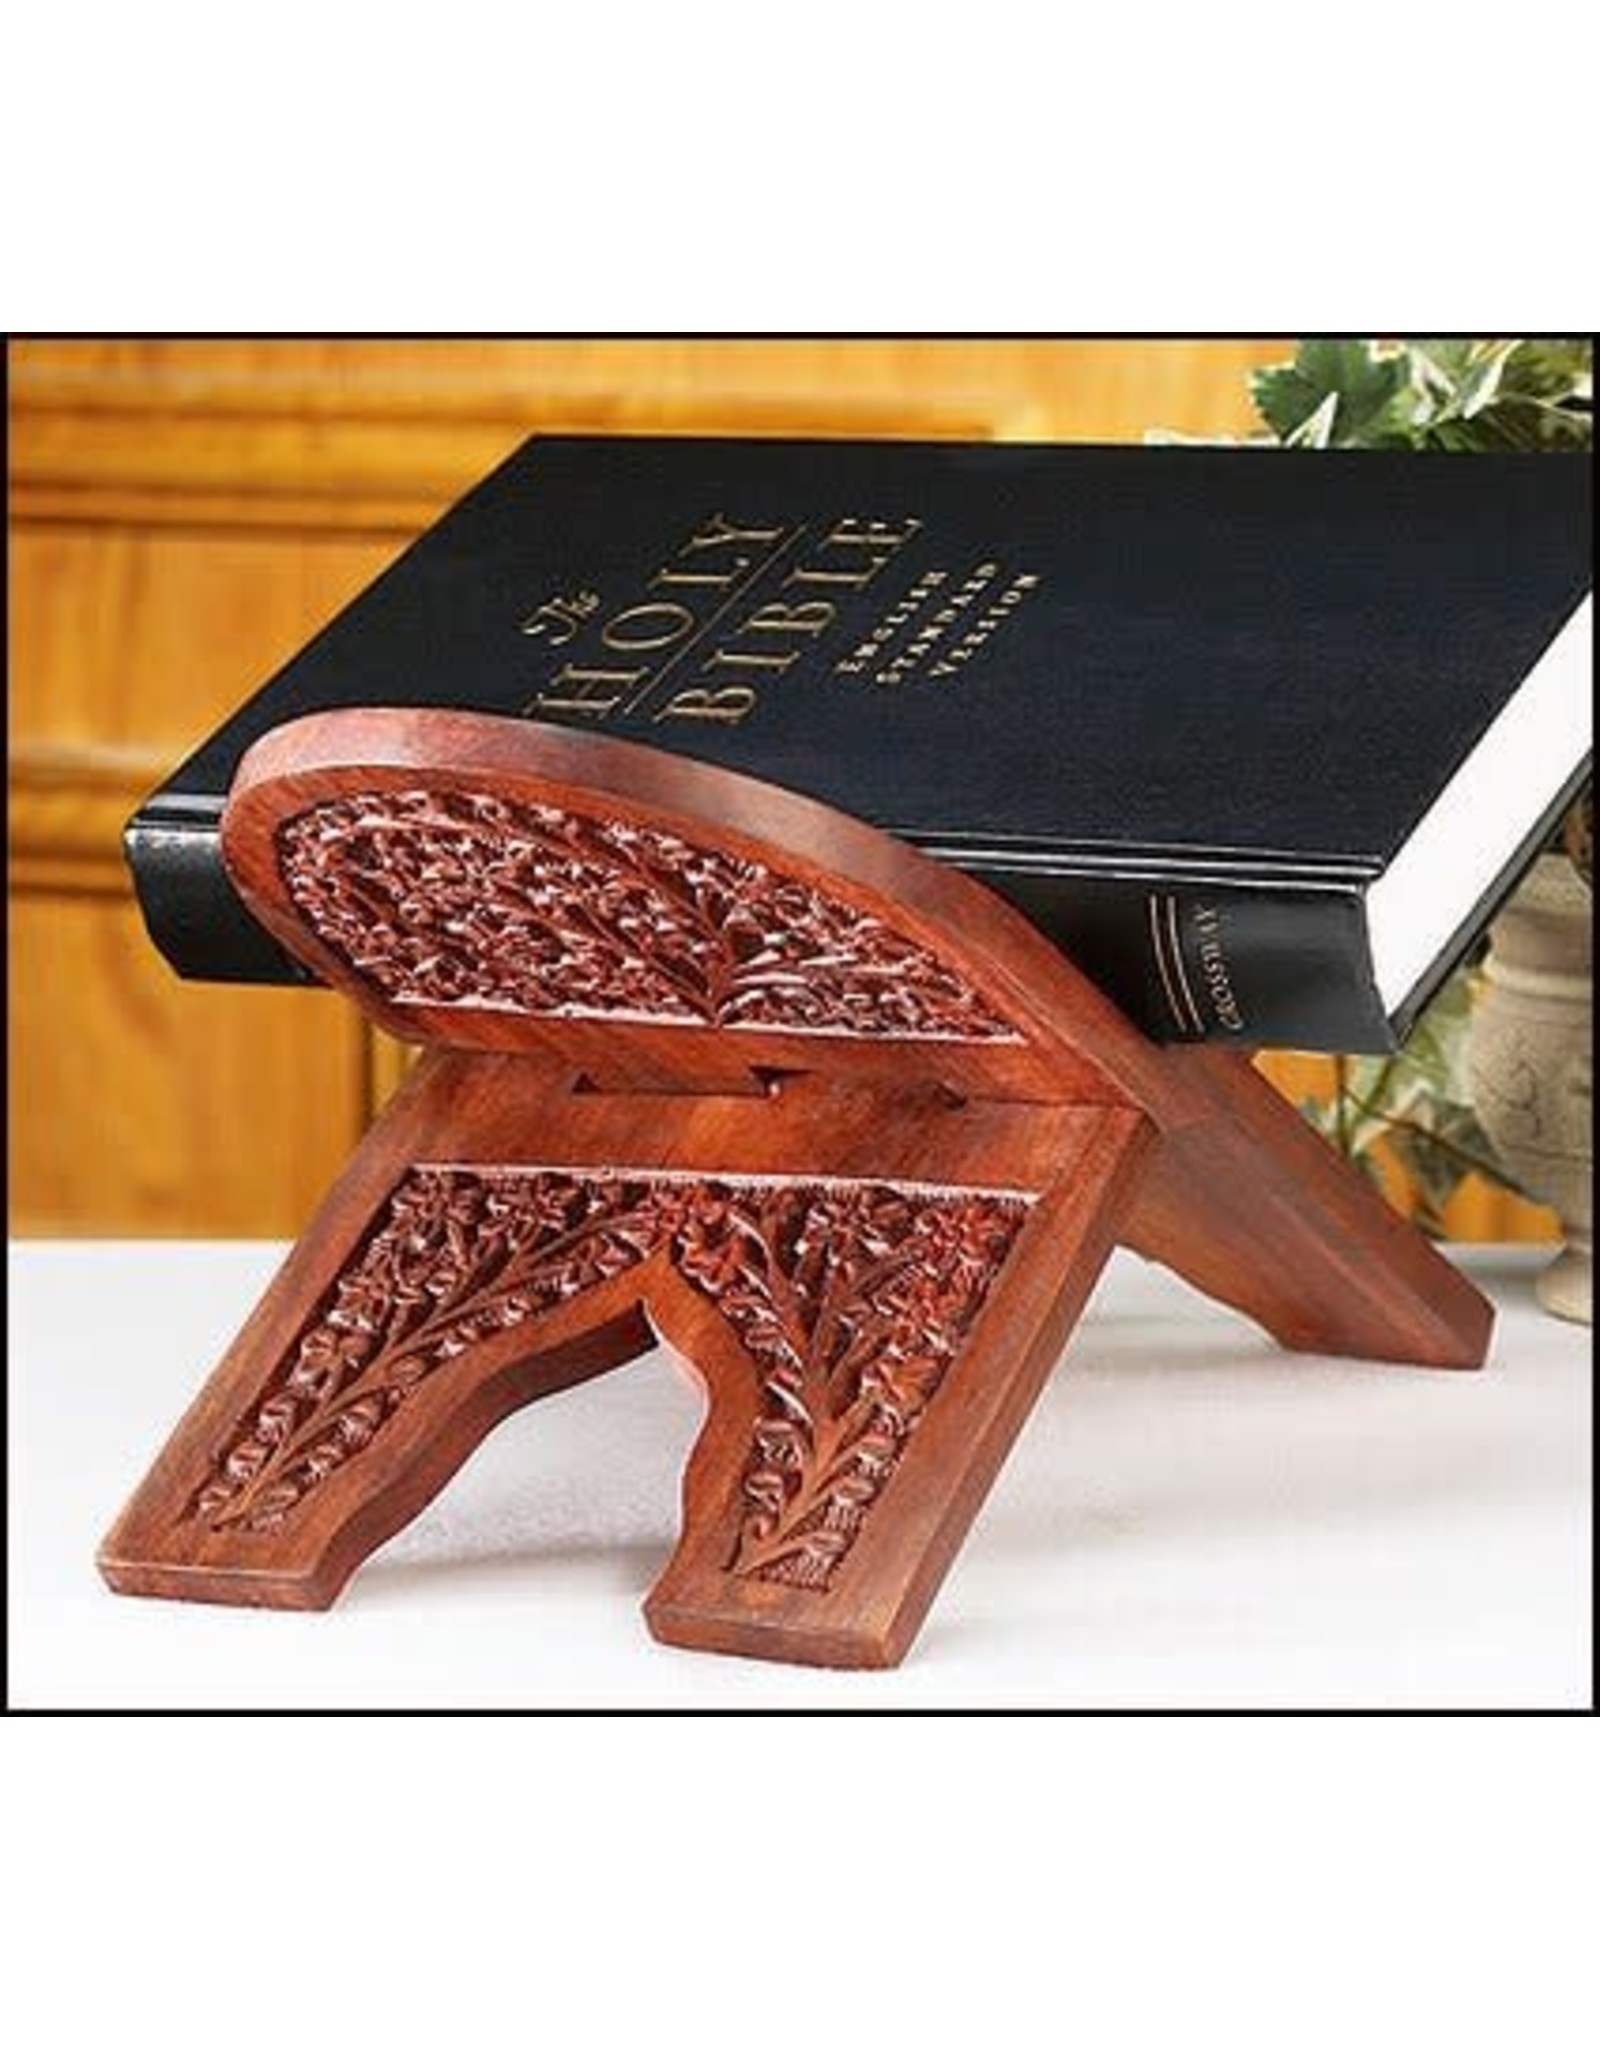 Carved Wood Bible Stand